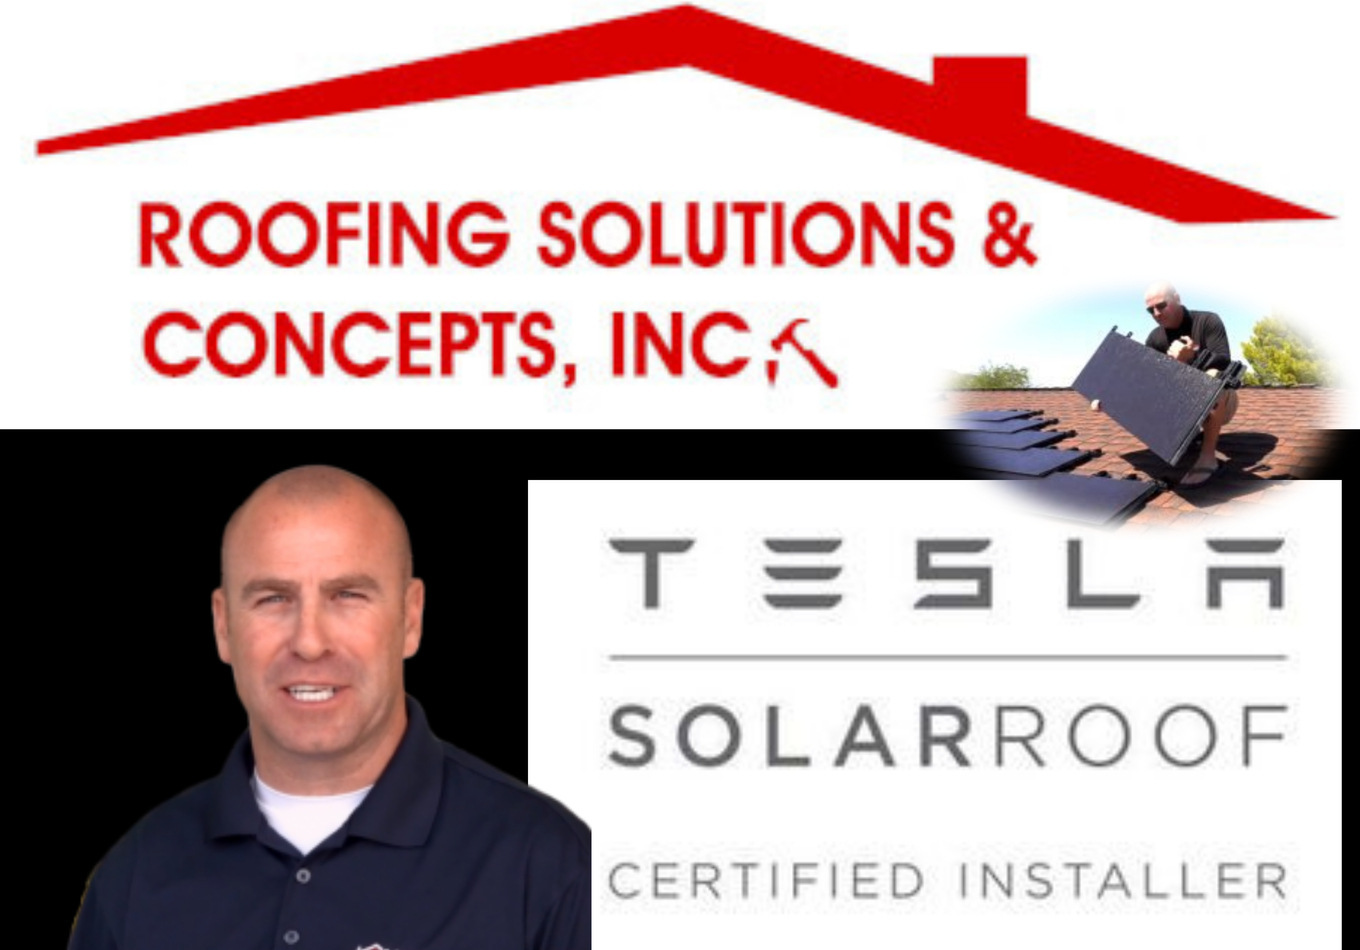 Roofing Solutions & Concepts, Inc., Tuesday, May 18, 2021, Press release picture